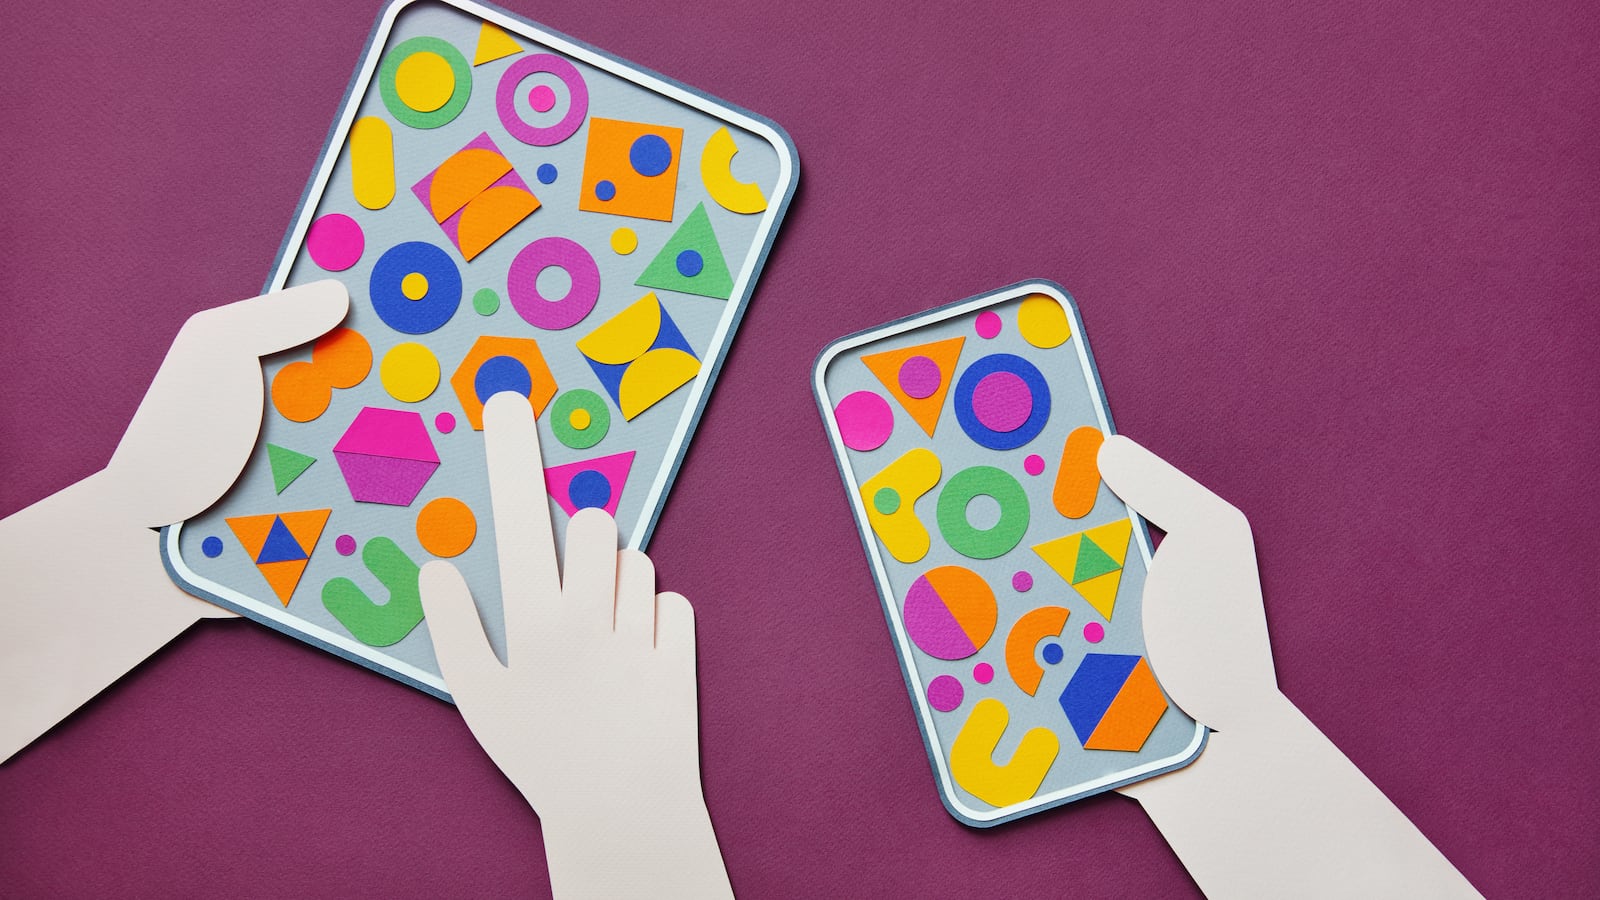 Paper craft illustration of hands holding digital tablet and smartphone with multi-colored geometric shapes. The backdrop is magenta.